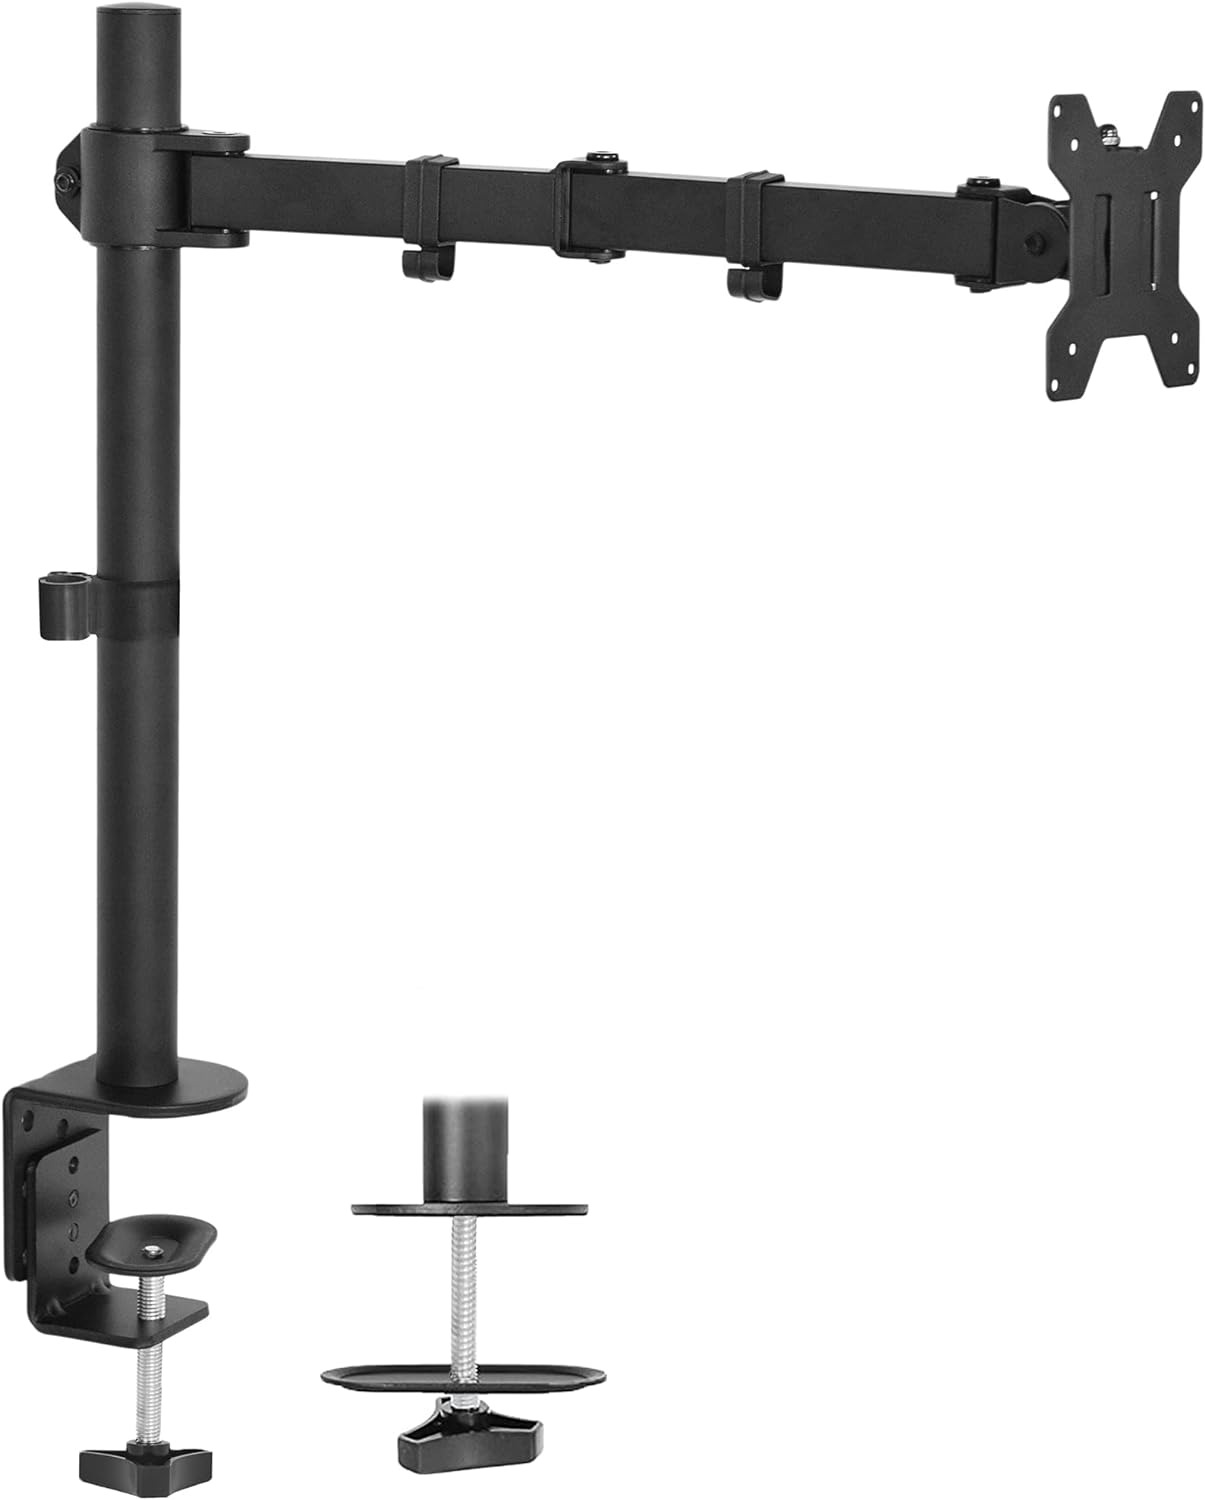 VIVO Single Monitor Arm Desk Mount, Holds Screens up to 32 inch Regular and 38